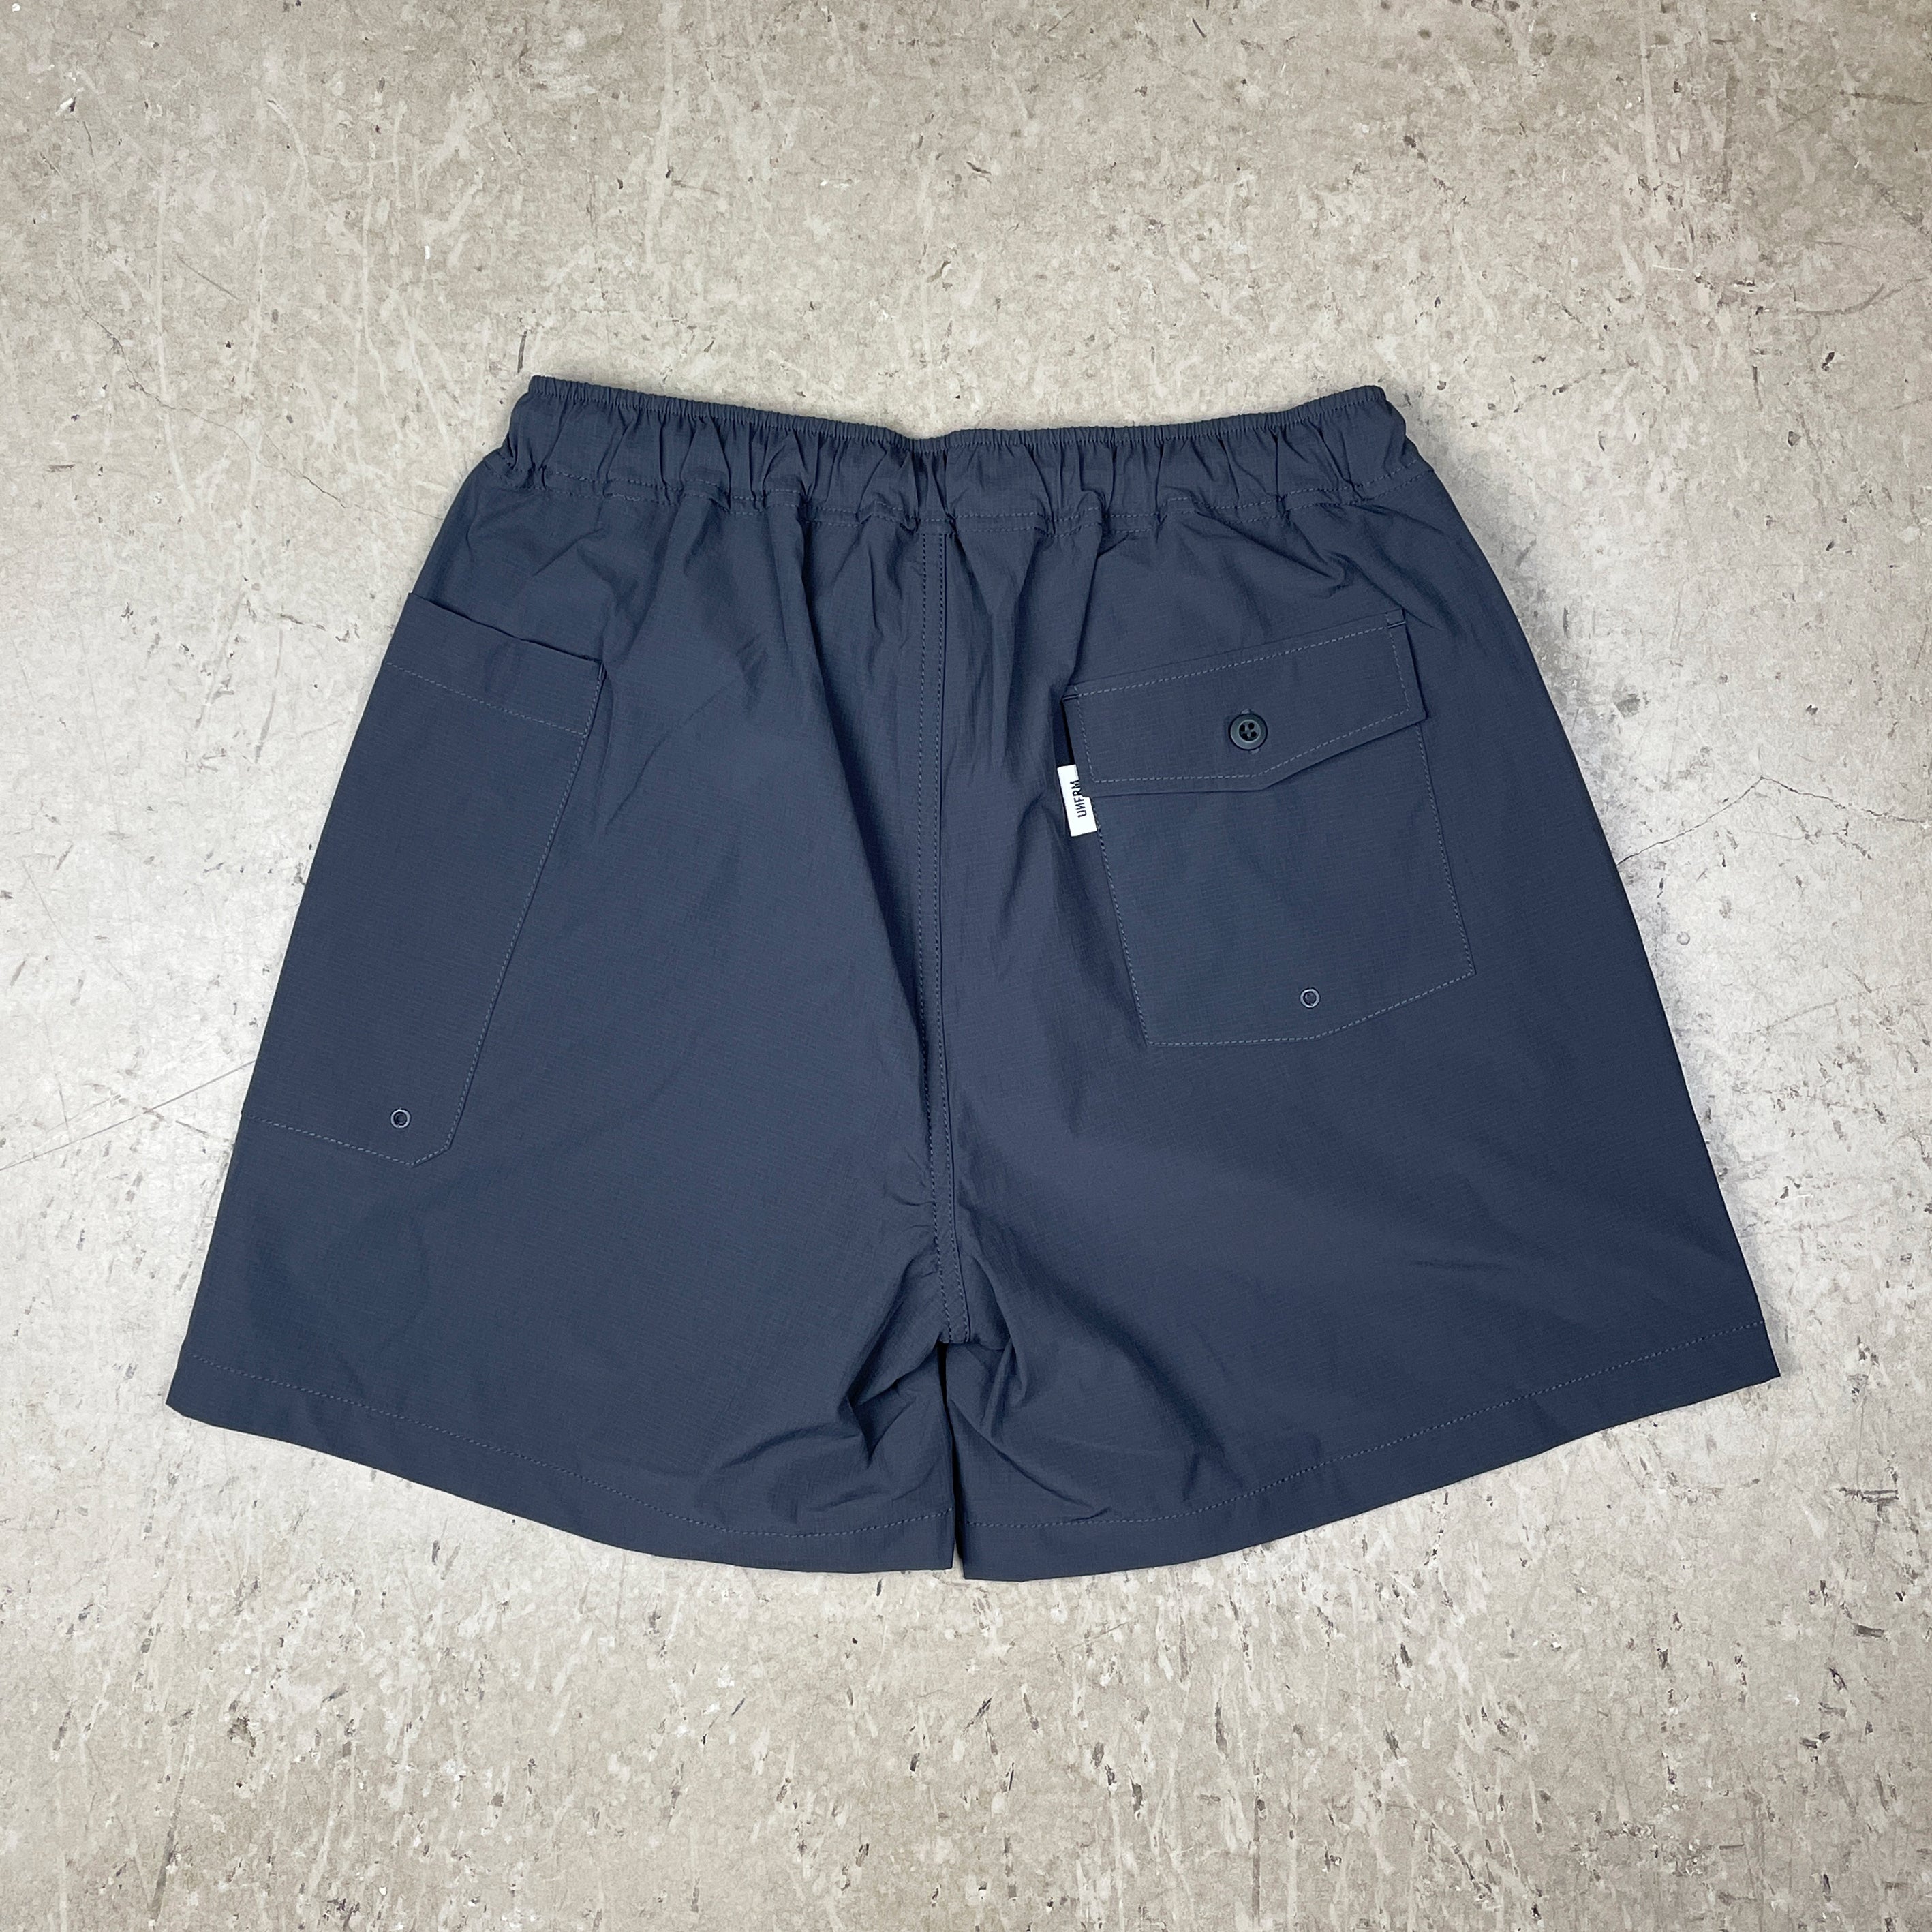 US NAVY 2WAY DRY STRETCH BAGGY SHORTS